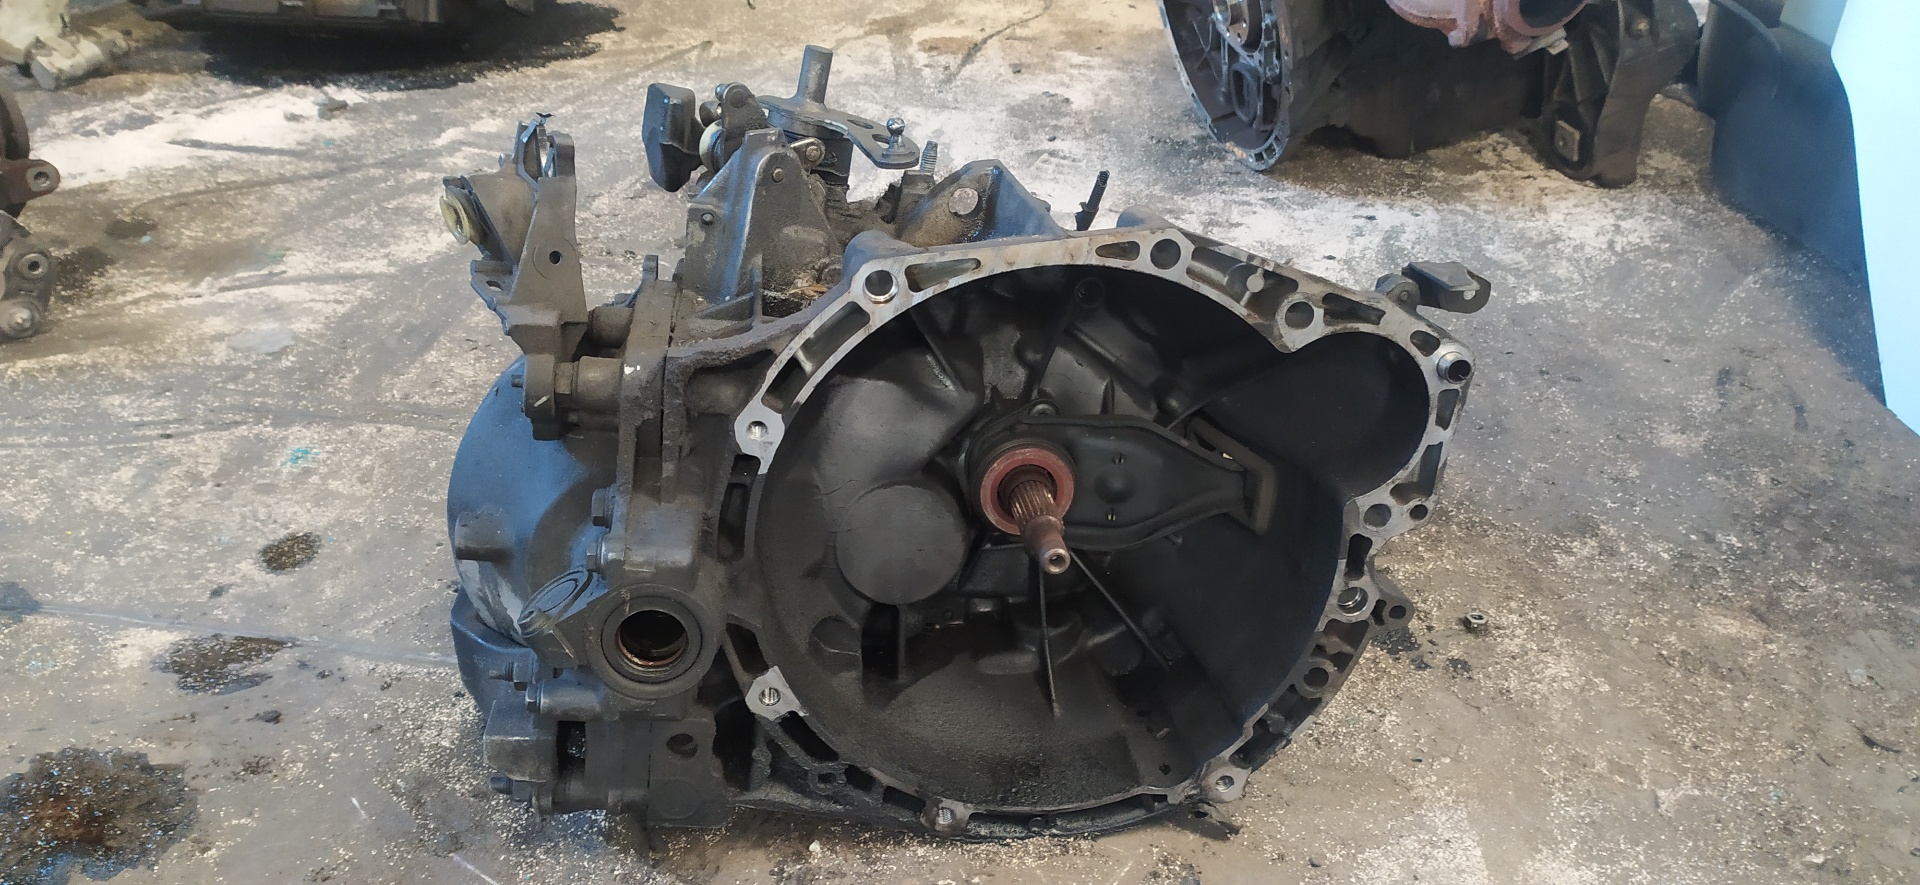 PEUGEOT 407 1 generation (2004-2010) Gearbox 20MB17 23837770